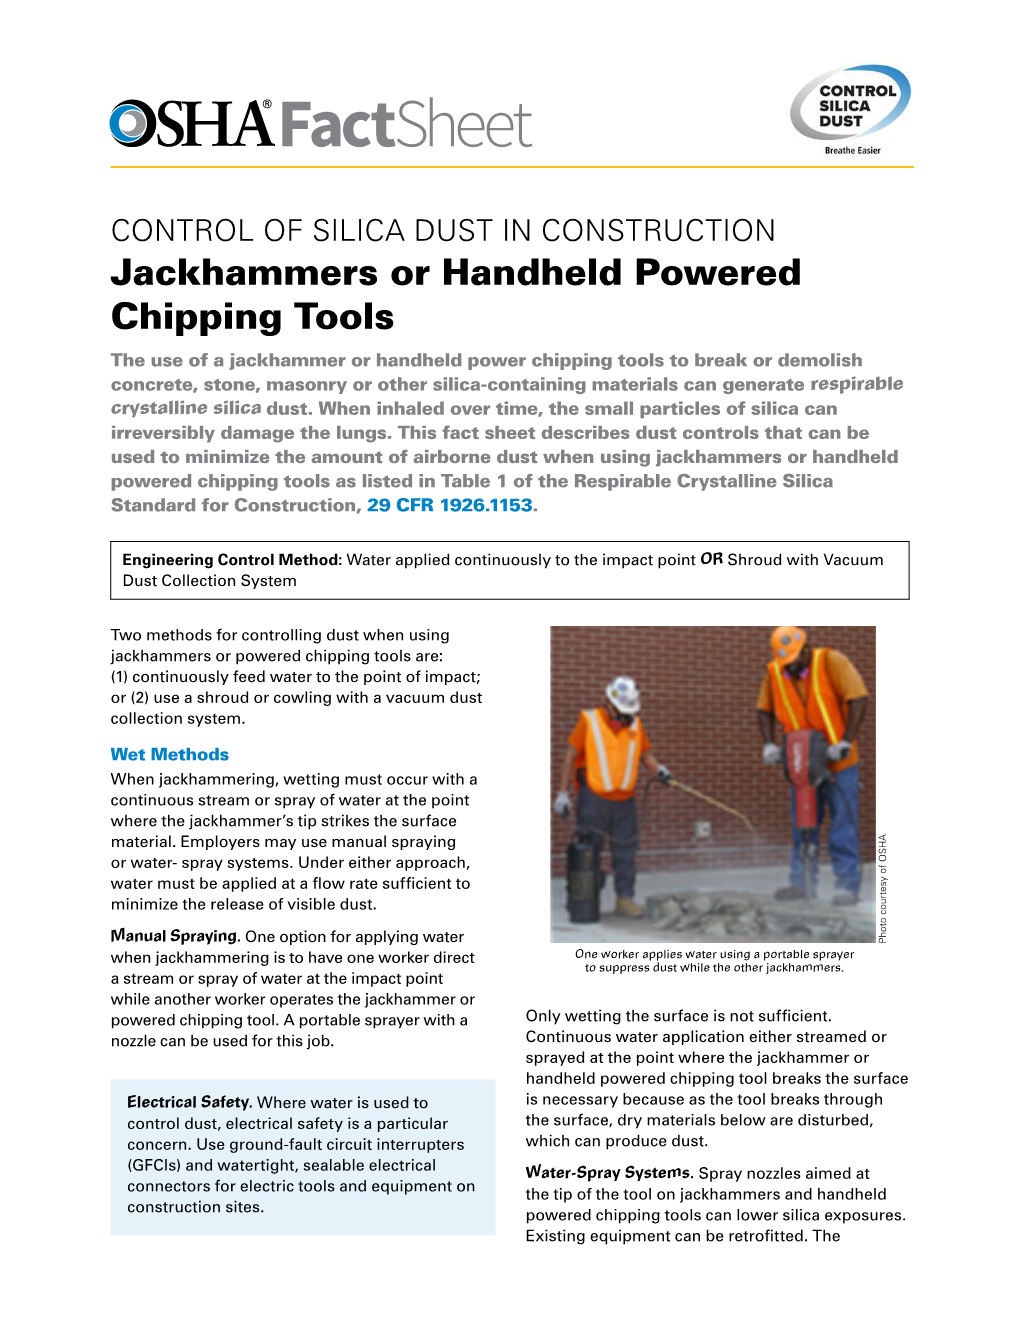 Jackhammers Or Handheld Powered Chipping Tools